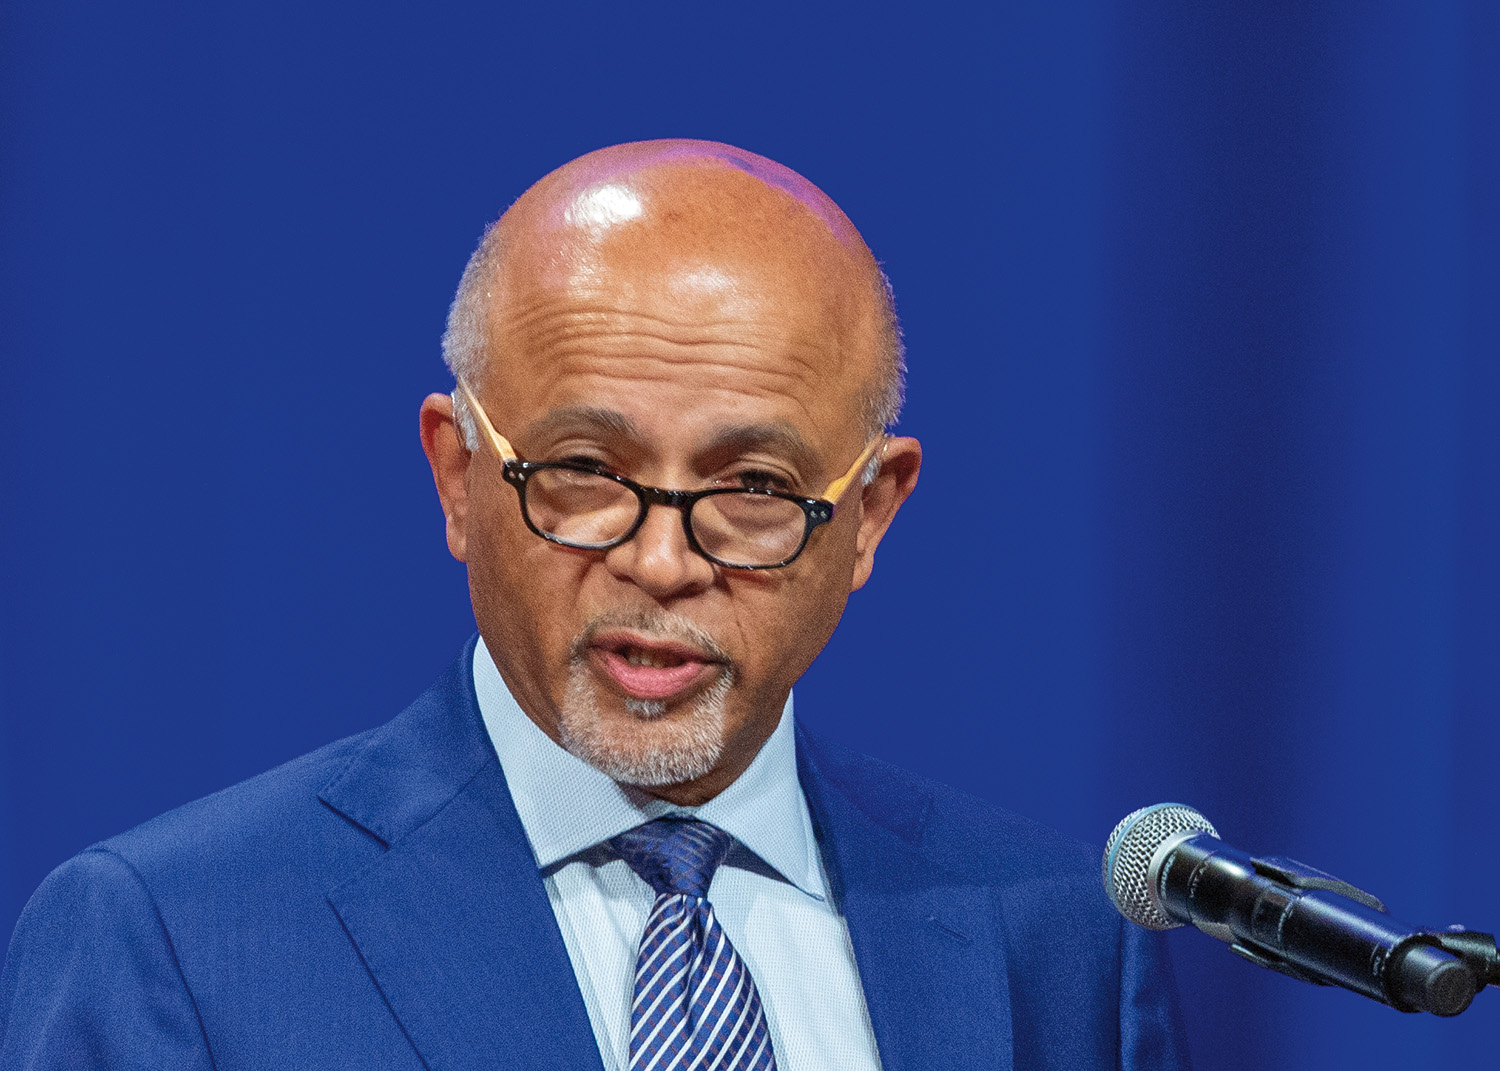 Abraham Verghese stands at a podium in front of a microphone. He has short, white hair and light brown skin. He wears glasses, a light blue collared shirt, a tie with red, white, and blue stripes, and a dark blue suit.